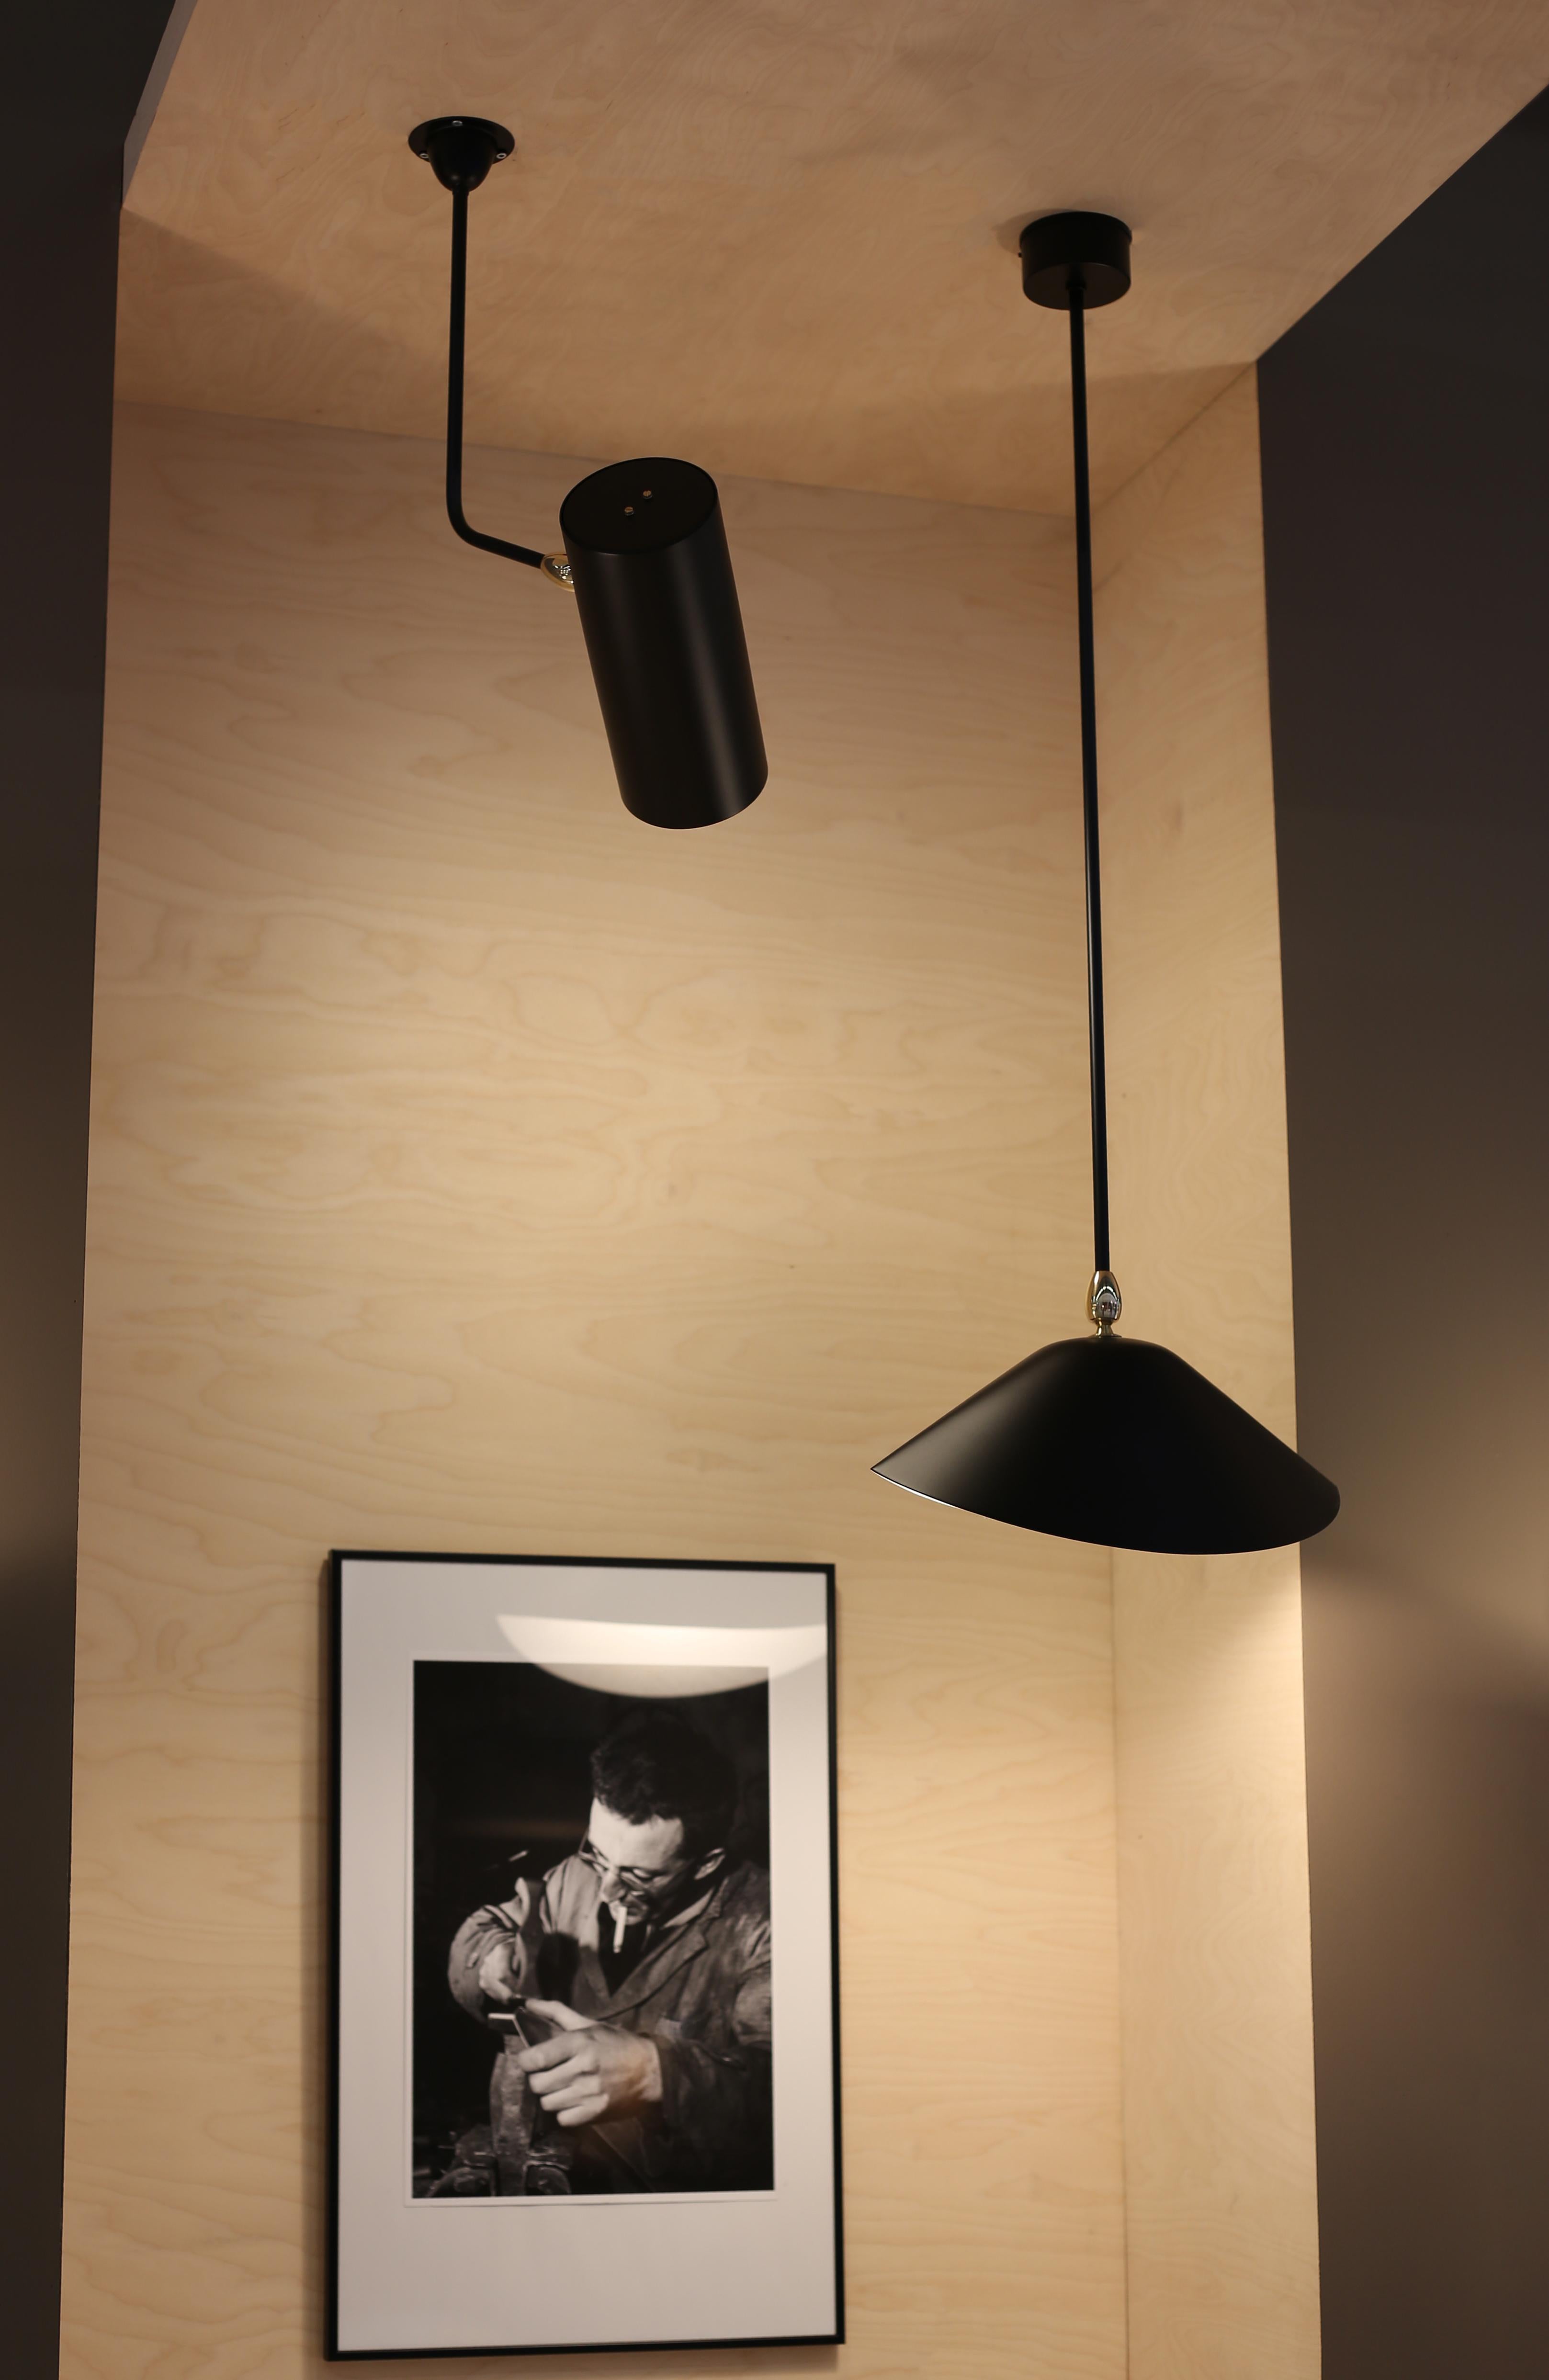 Serge Mouille 'Tuyau' ceiling lamp in black.

Originally designed in 1955, this iconic ceiling lamp is still made by Edition Serge Mouille in France using many of the same small-scale manufacturing techniques and scrupulous attention to detail,